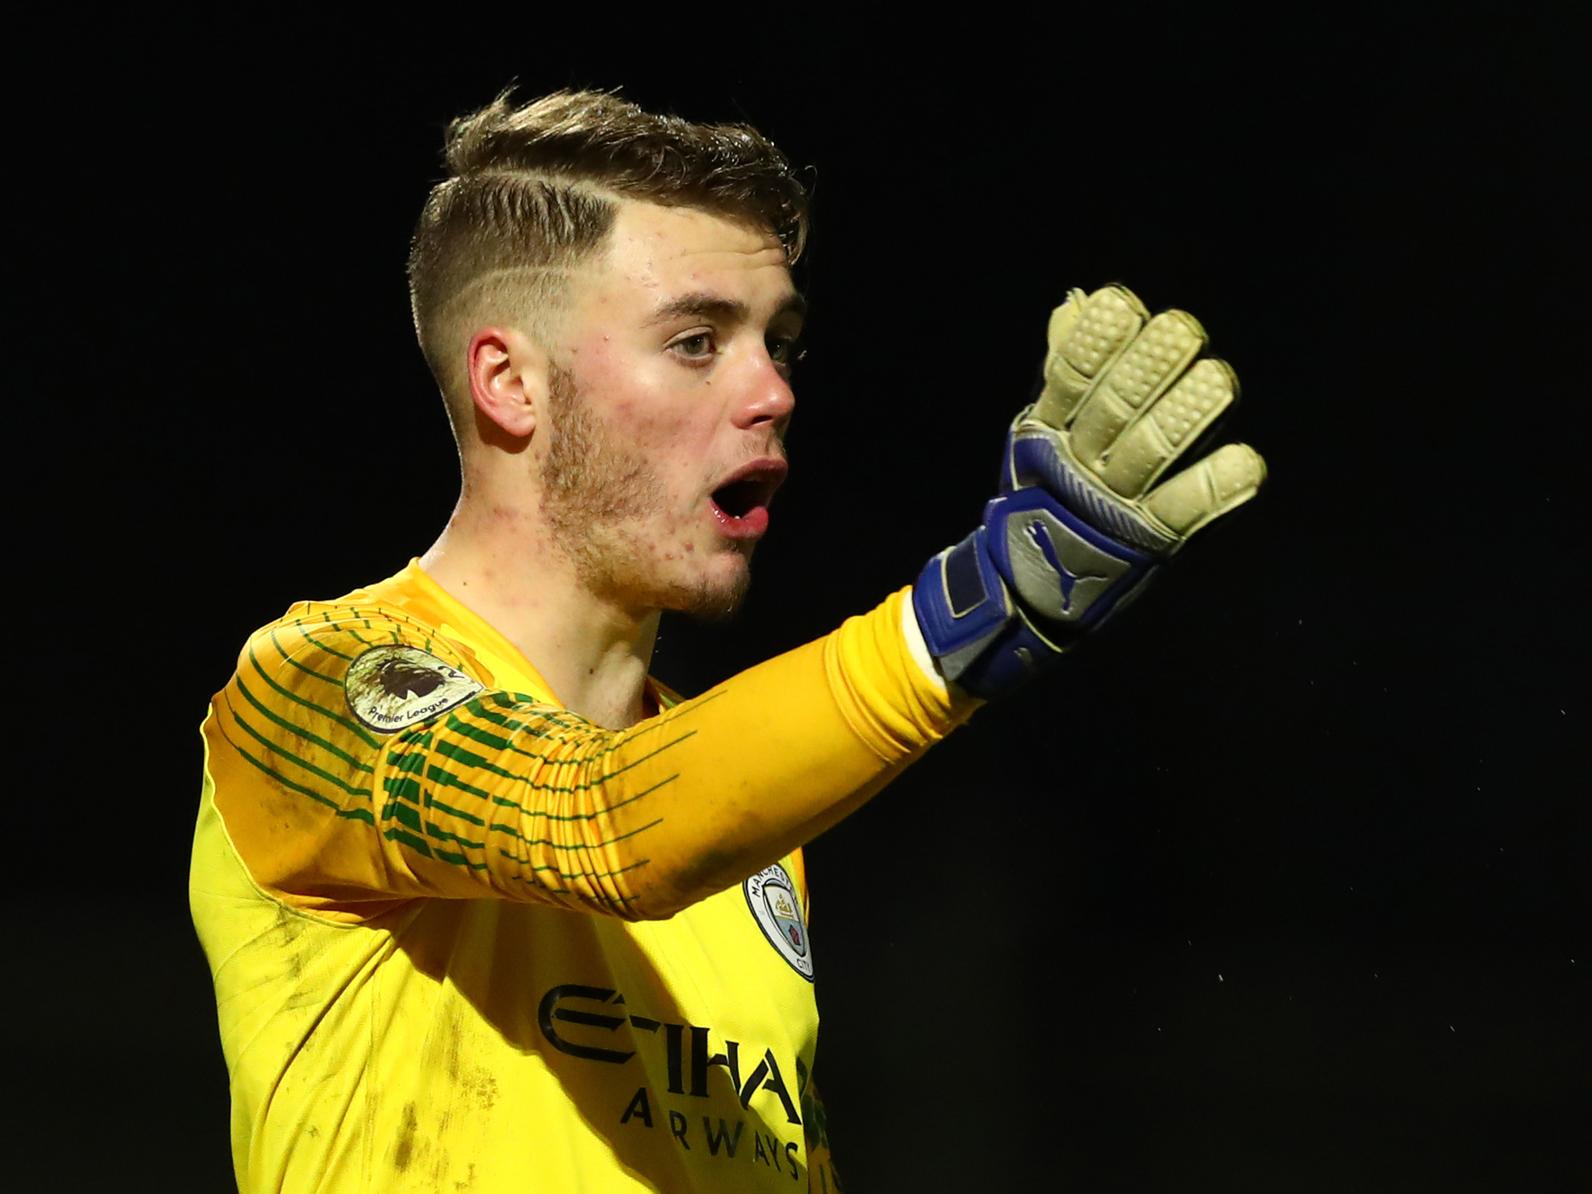 Cardiff City are said to be keeping tabs on former Manchester City youth academy starlet Curtis Anderson, who is currently on the books at USL Championship side Charlotte Independence. (The 72)